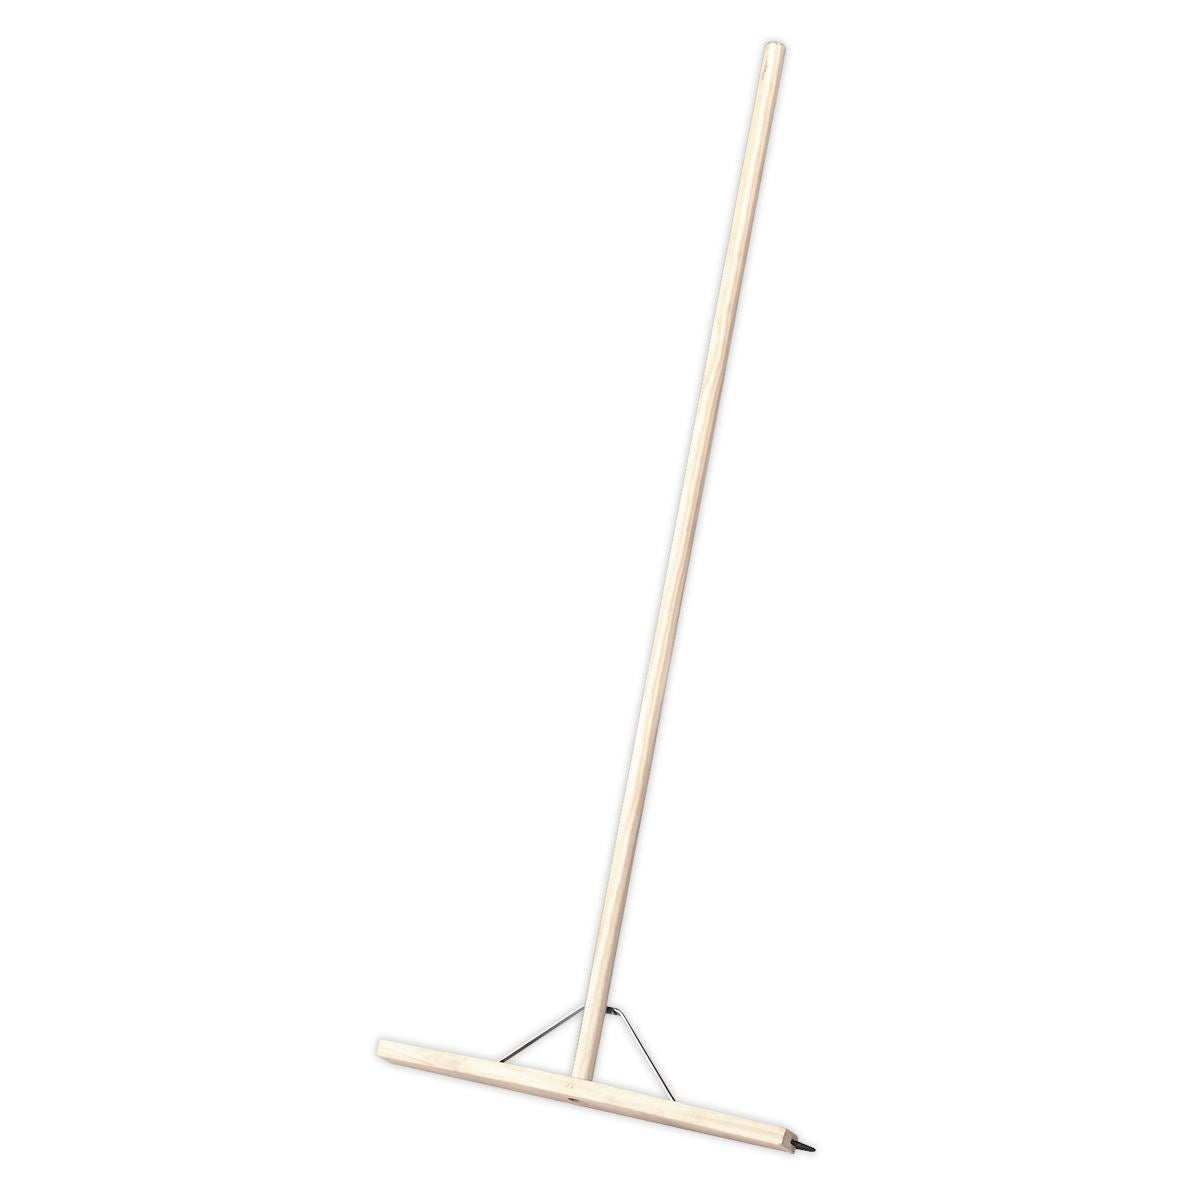 Sealey Rubber Floor Squeegee 24"(600mm) with Wooden Handle